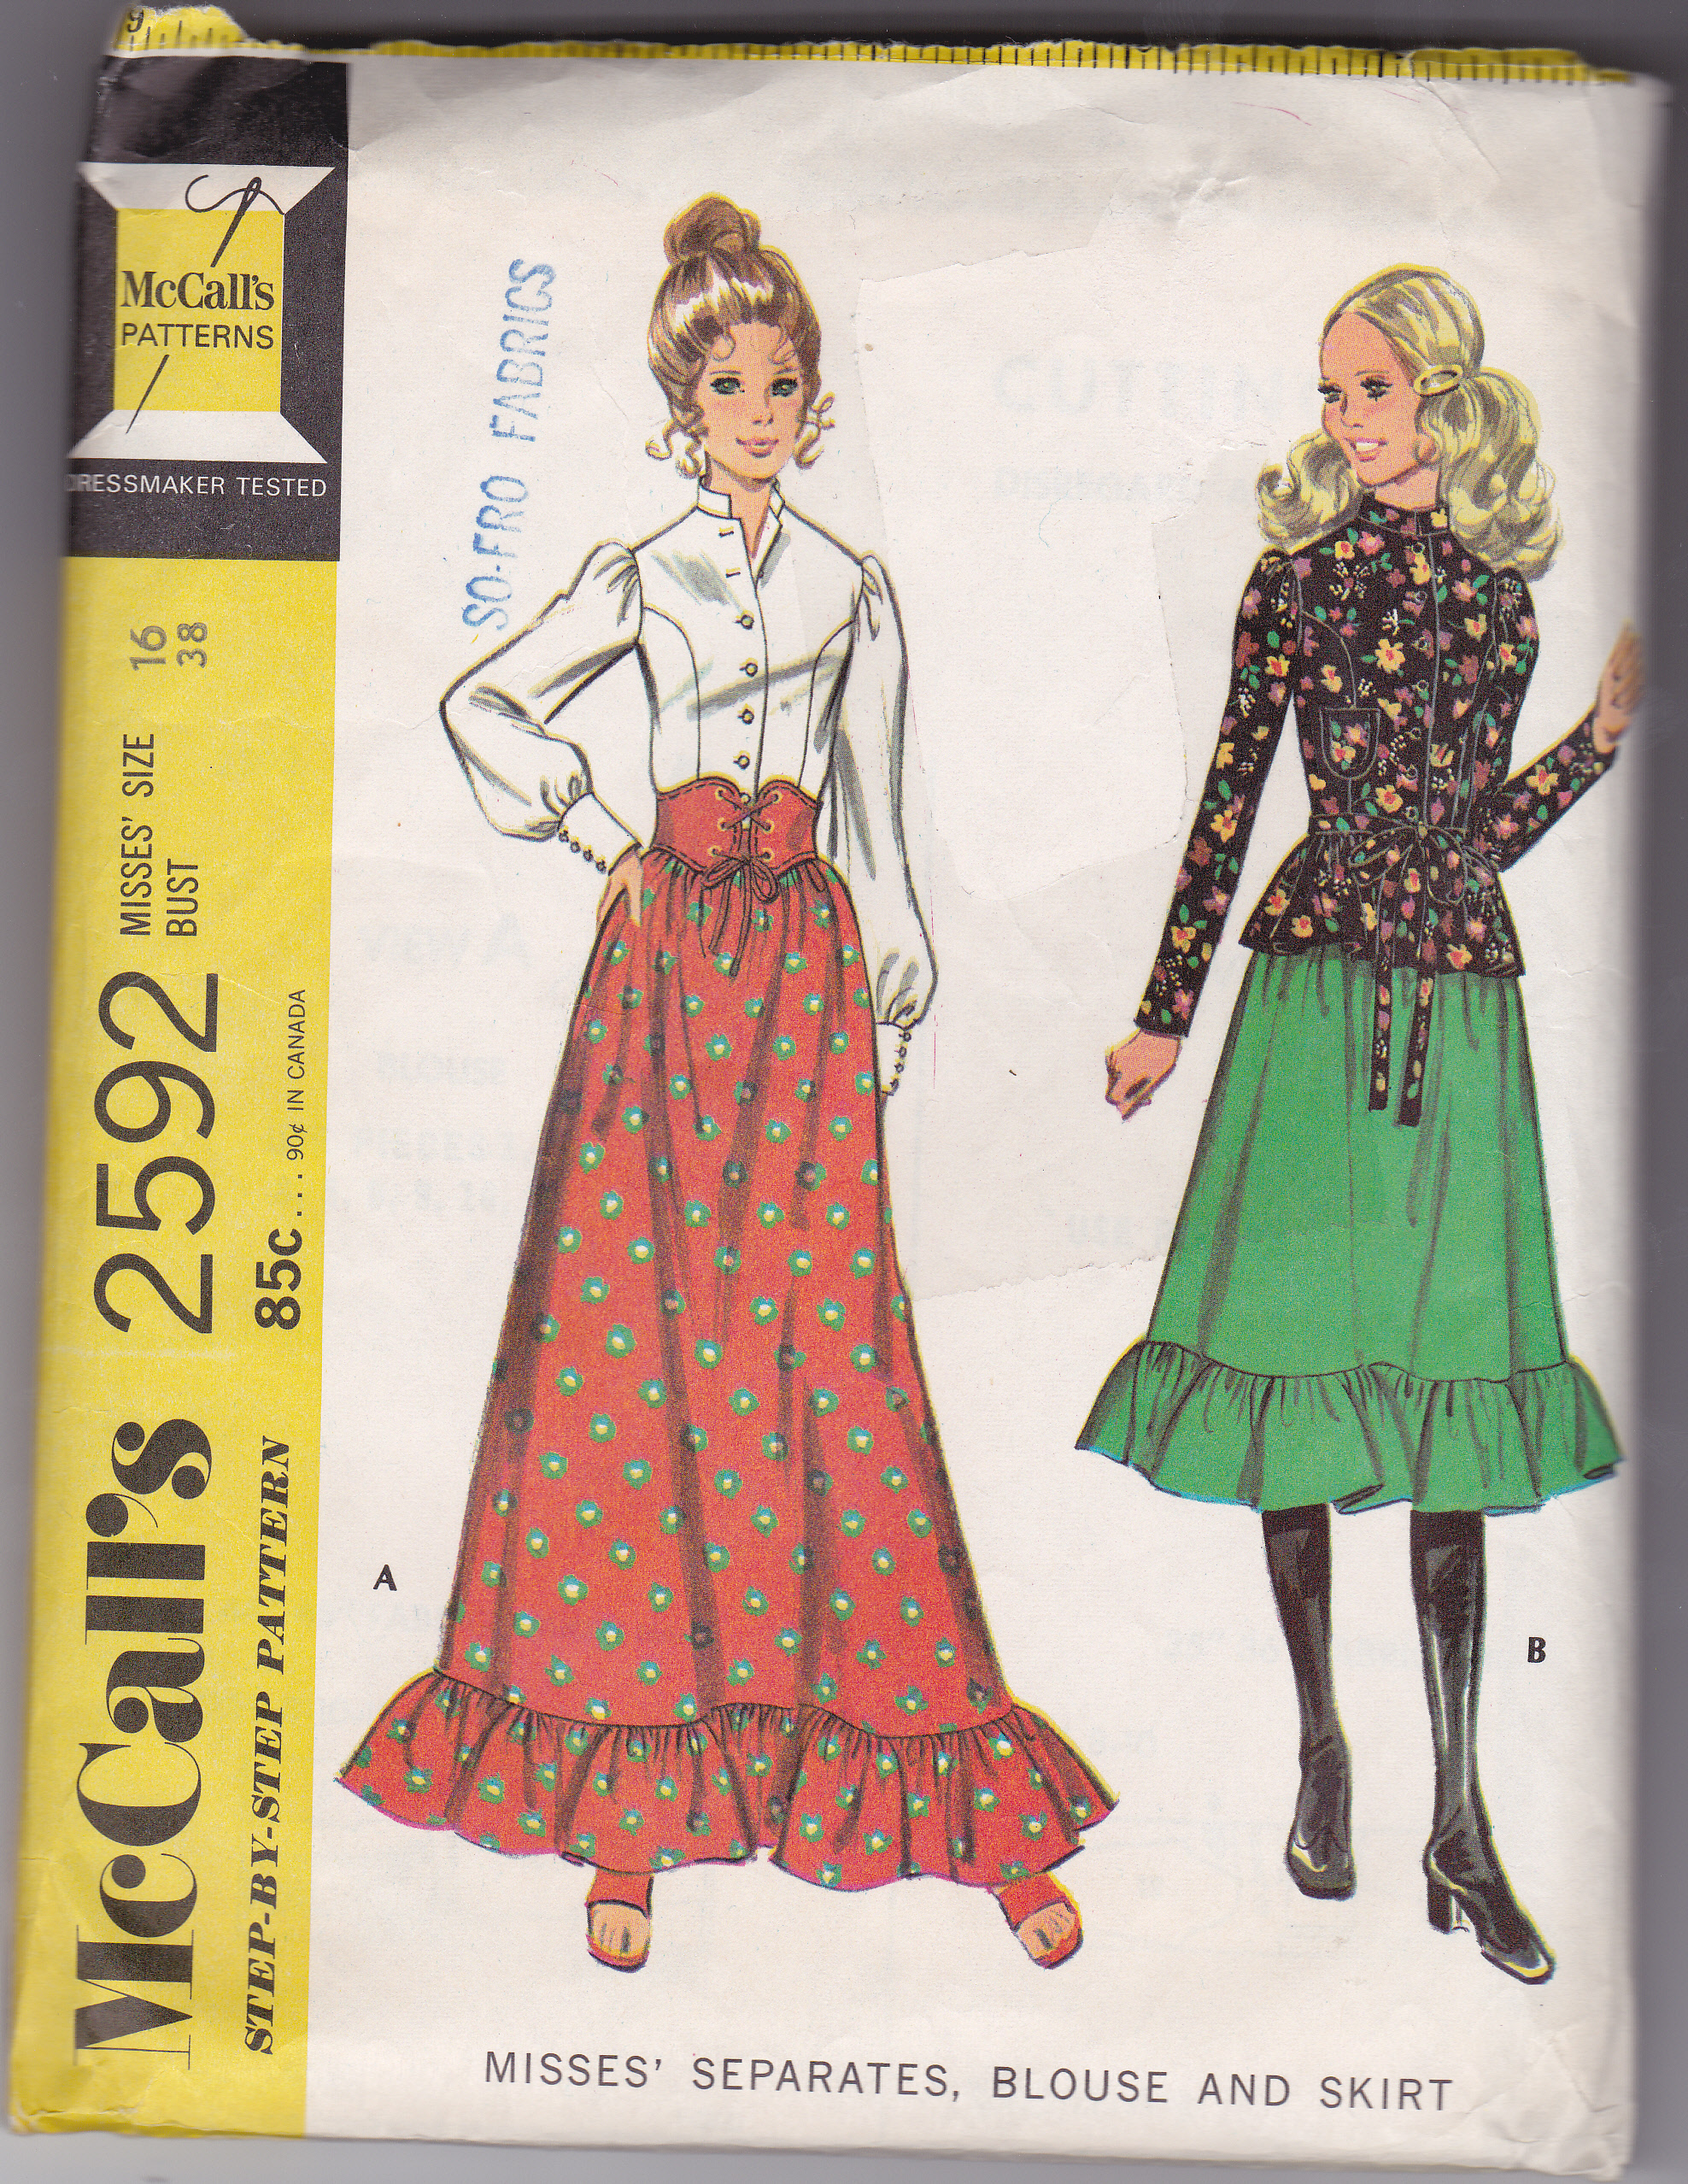 McCall's 2592 | Vintage Sewing Patterns | FANDOM powered by Wikia